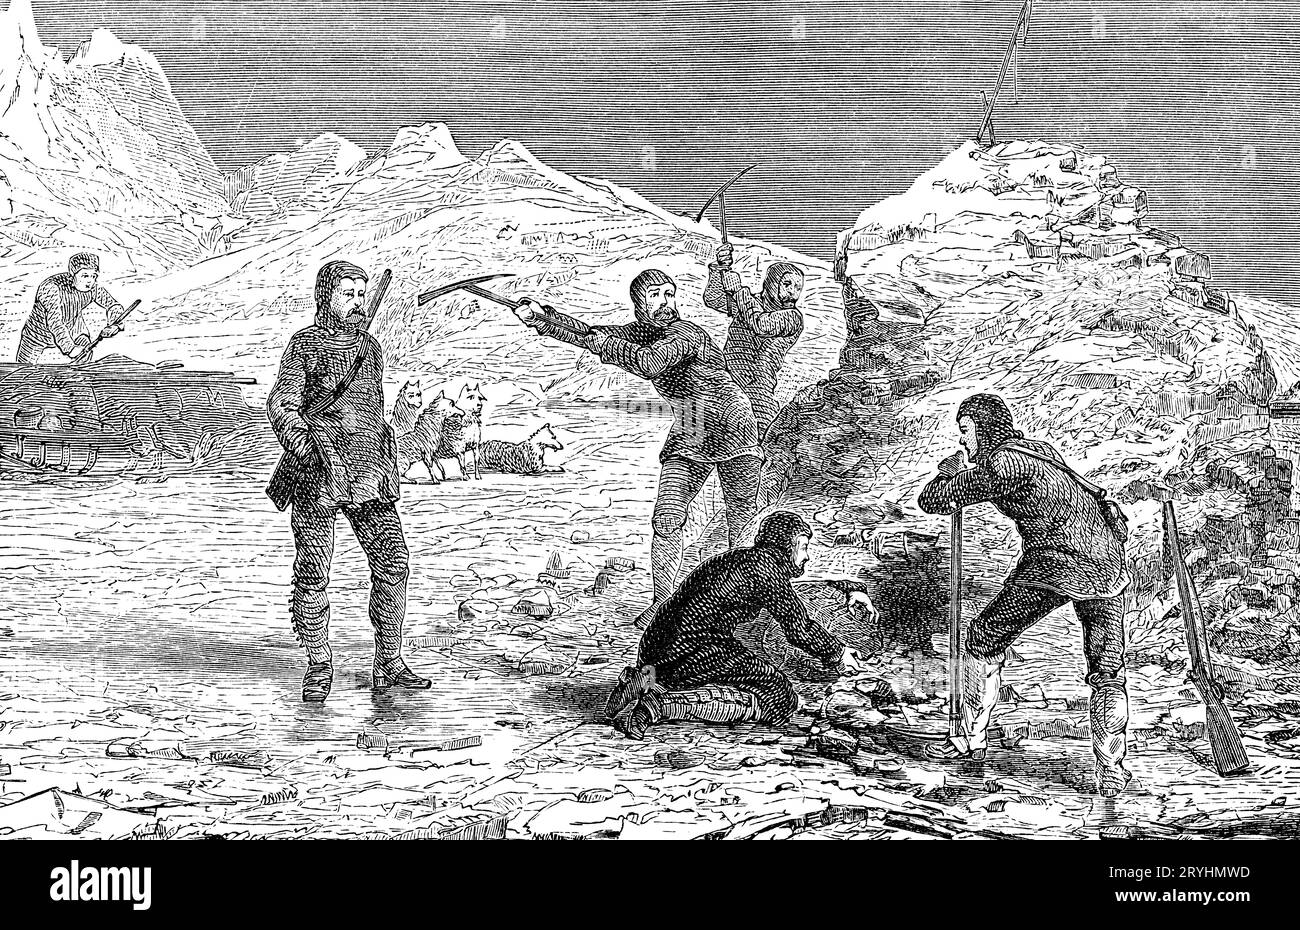 William Hobson and the men of the McClintock Artic Expedition finding the cairn with the 'Victory Point' note, Back Bay, King William Island, May 1859. The letters inside the cairn gave details of Captain Sir John Franklin's lost expedition of 1845. Sir John Franklin's (1786-1847), expedition left England in 1845 aboard two ships, HMS Erebus and HMS Terror, and was assigned to traverse the last unnavigated sections of the Northwest Passage. The expedition met with disaster after both ships and their crews became icebound in Victoria Strait near King William Island. Stock Photo